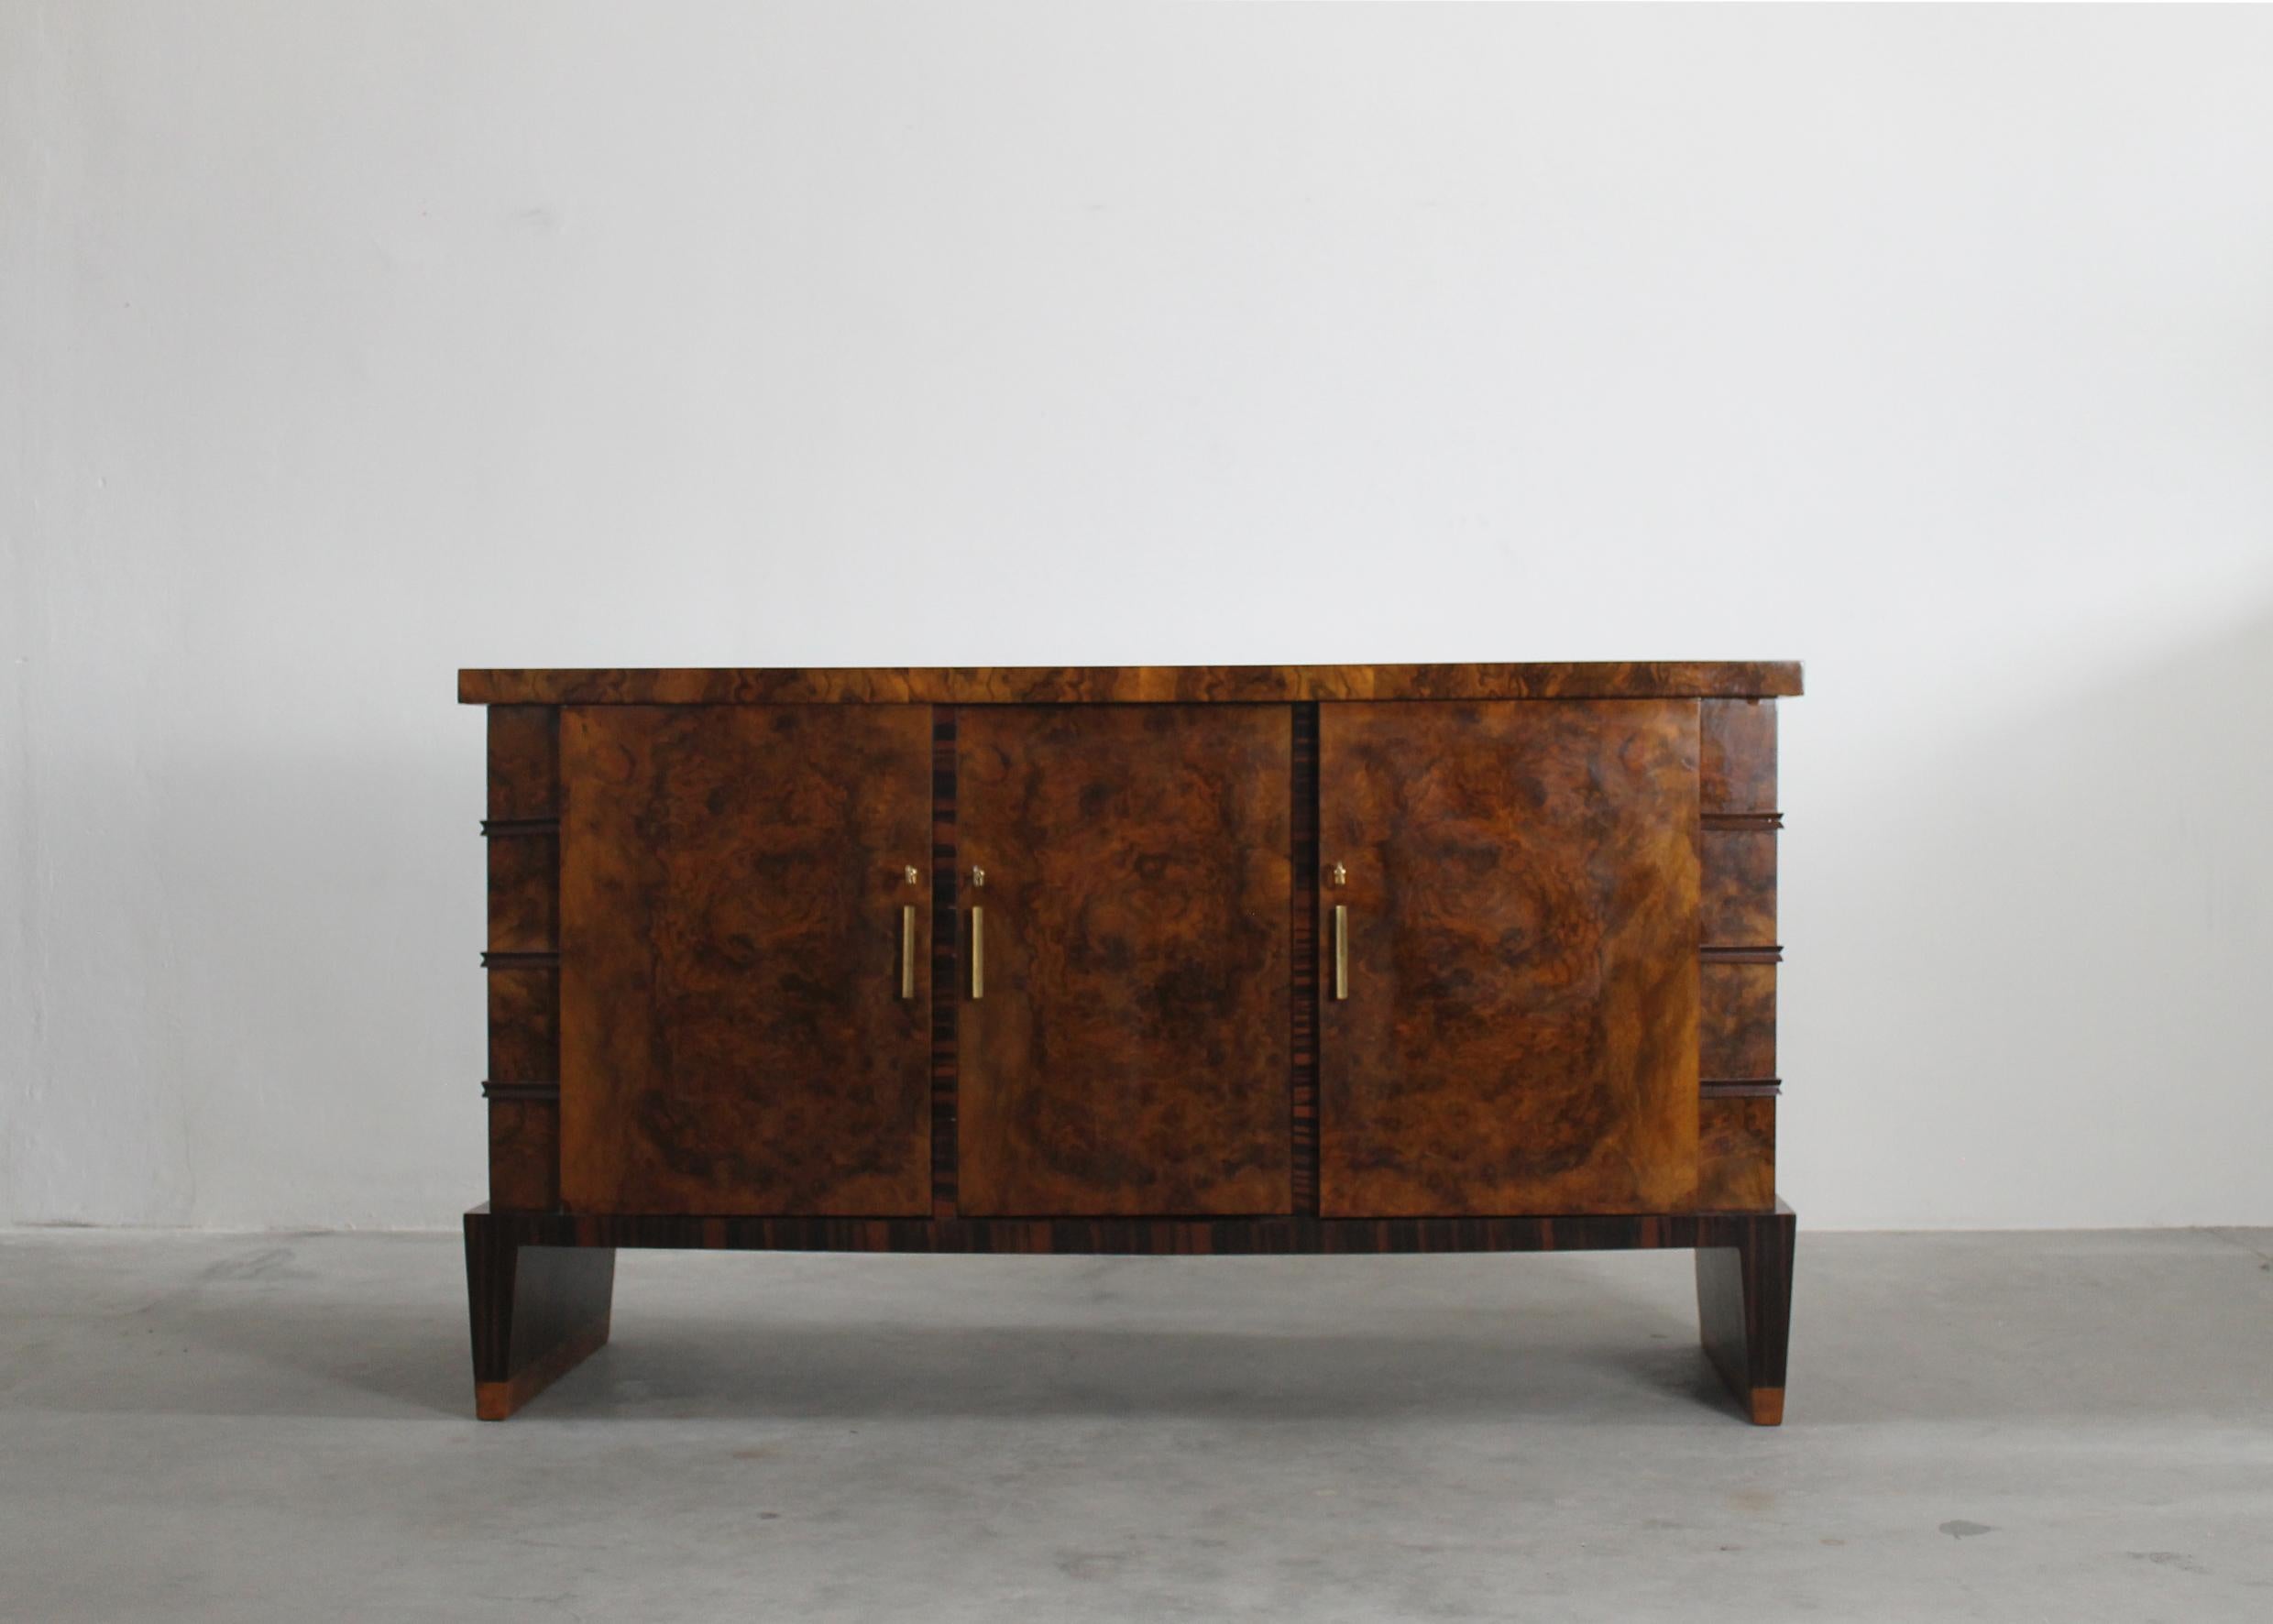 A mid-century sideboard with structure in walnut veneer with brass details, the sideboard presents three doors and six inner shelves. 
Designed by Emilio Lancia, Italian manufacture from the 1930s.

Emilio Lancia was an Italian architect, and one of